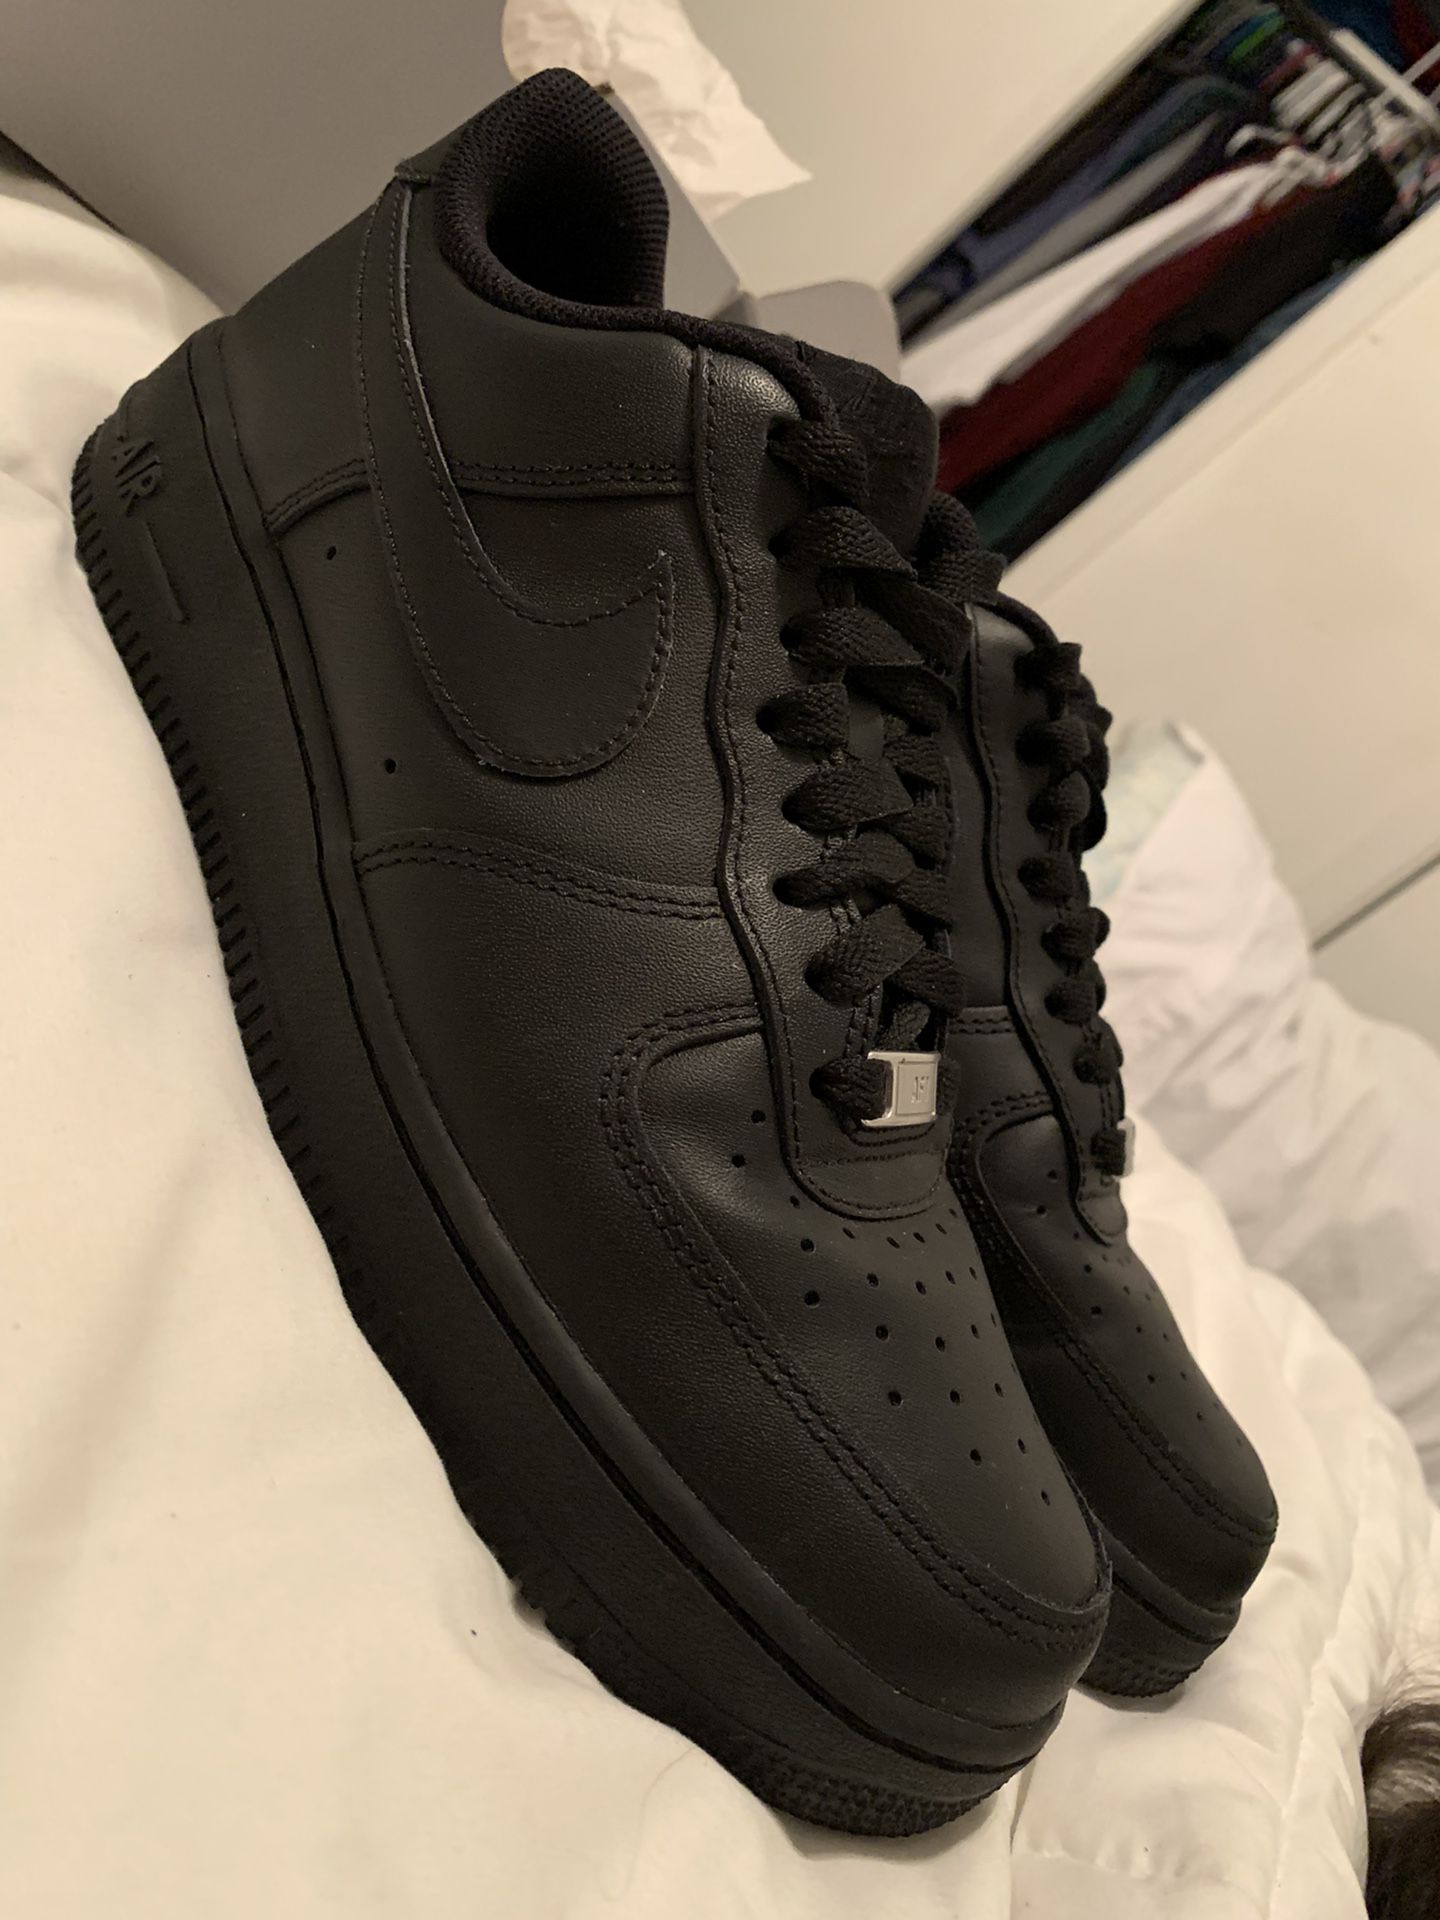 Black Air Force 1 07 Shoes for Sale in Arlington, TX - OfferUp